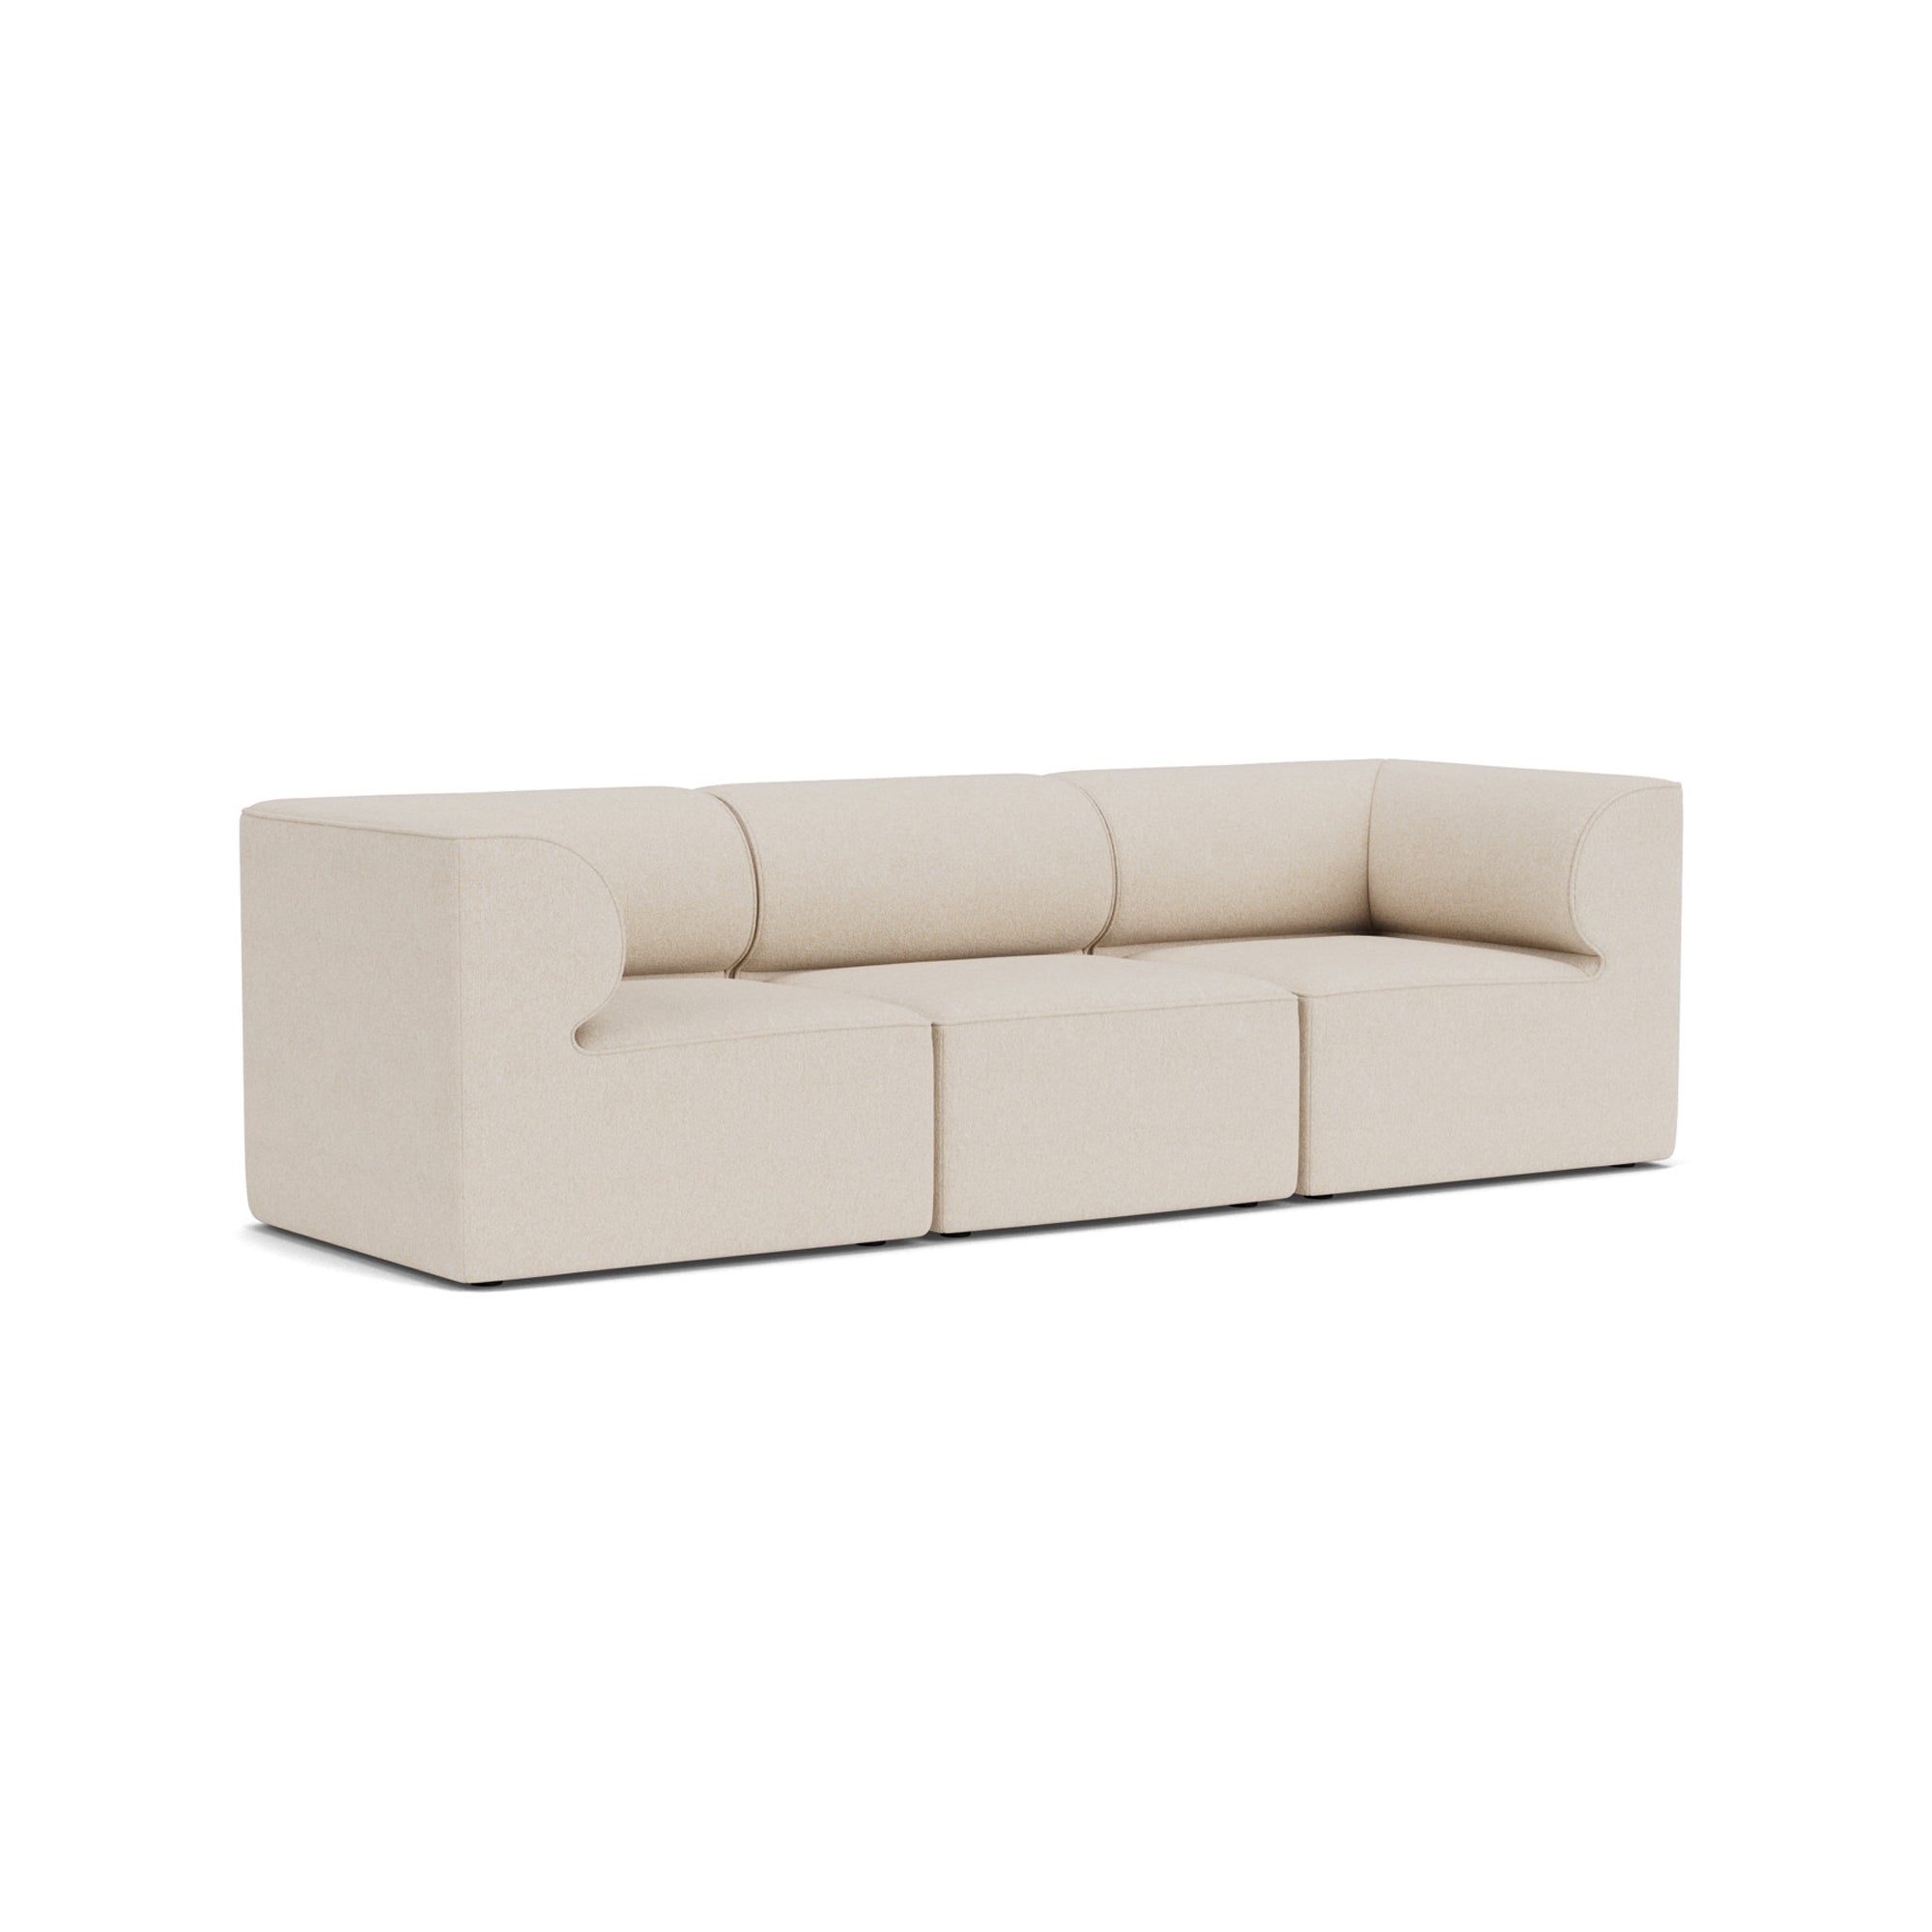 Eave Sectional Sofa 86 3 Seater